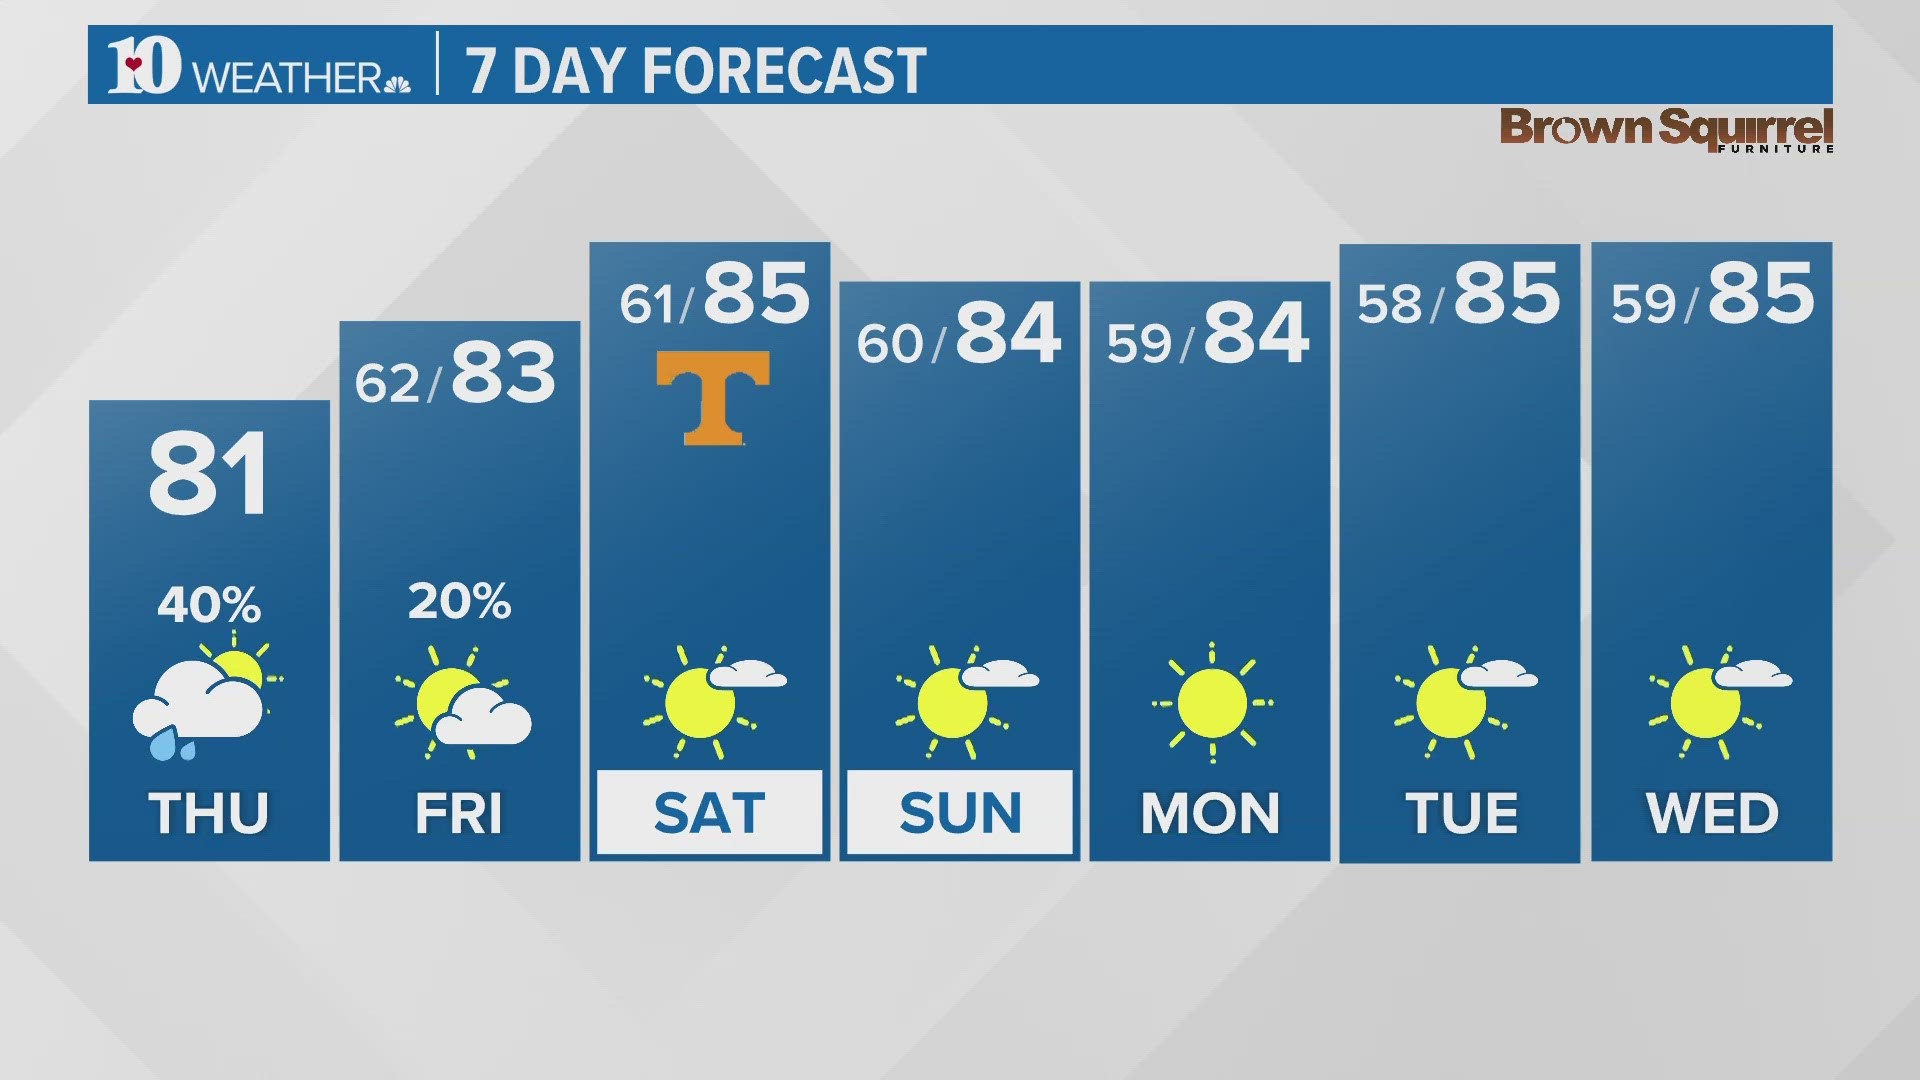 The extended forecast looks drier with highs in the 80s.